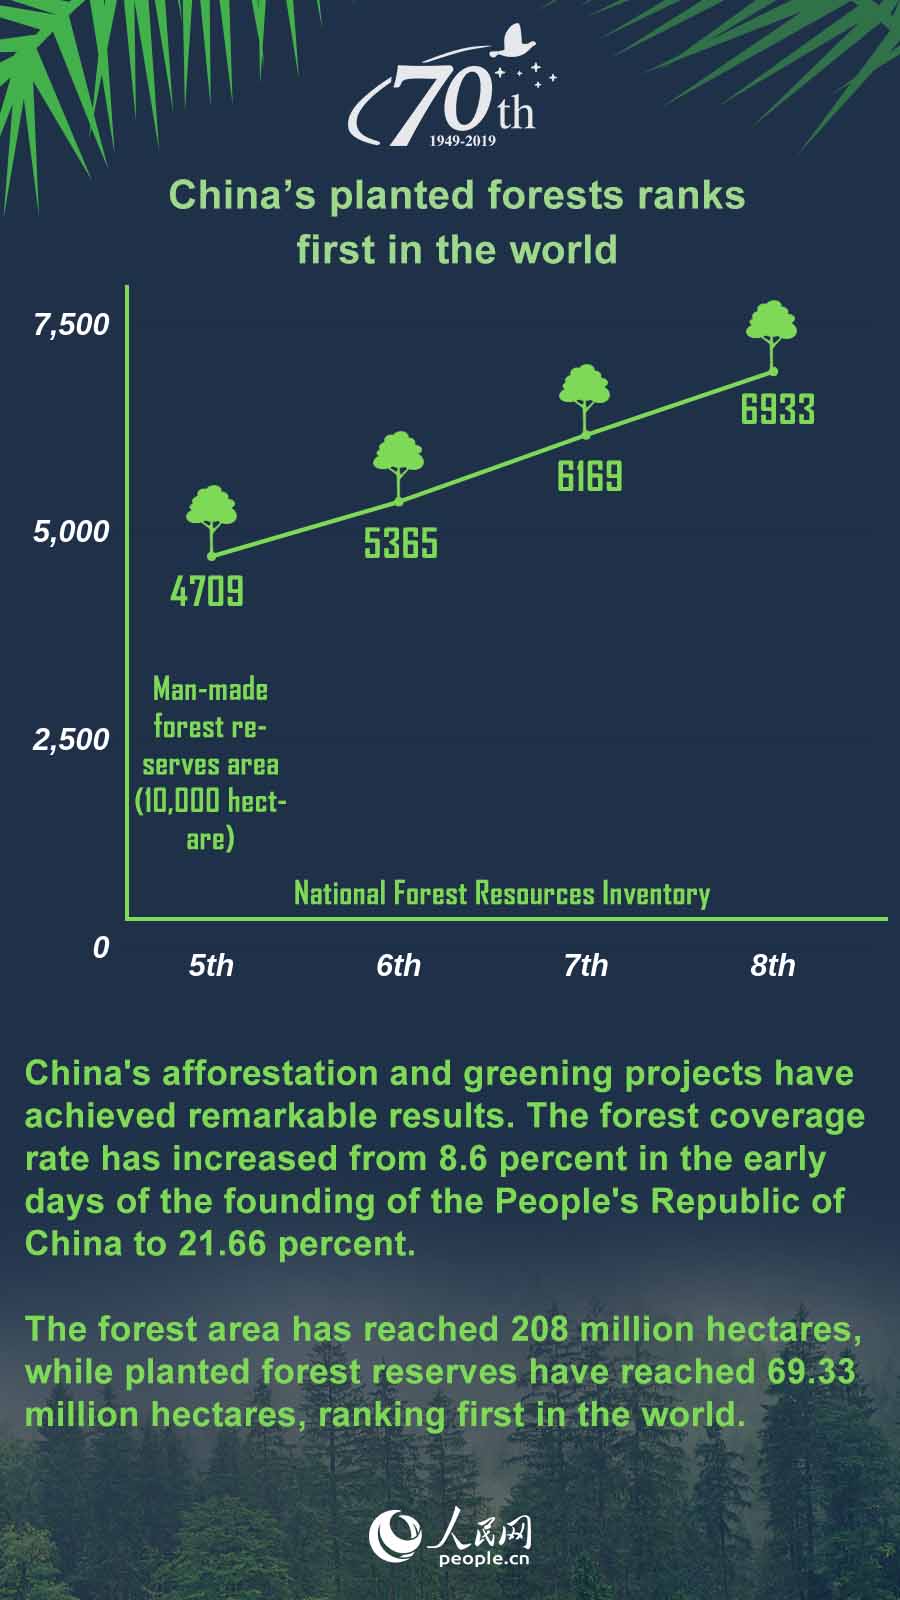 China in 70 years: China’s planted forests ranks first in the world